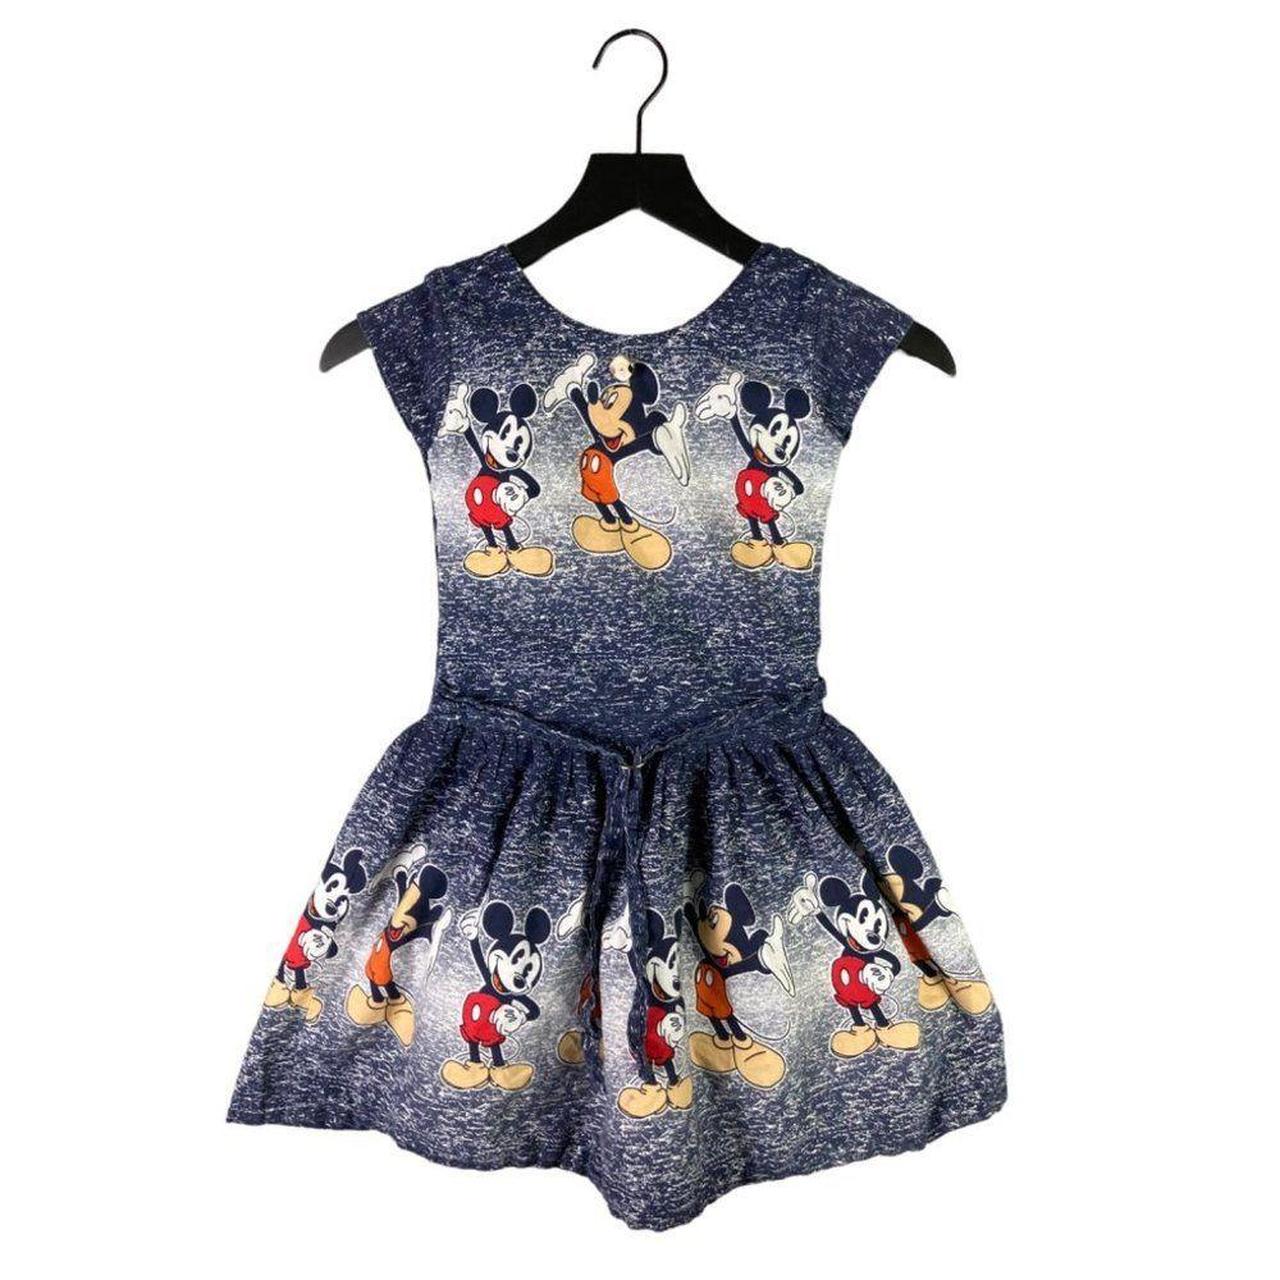 Girls Sleeveless Dress - Sketch of Mickey Mouse - Rainbow Rules